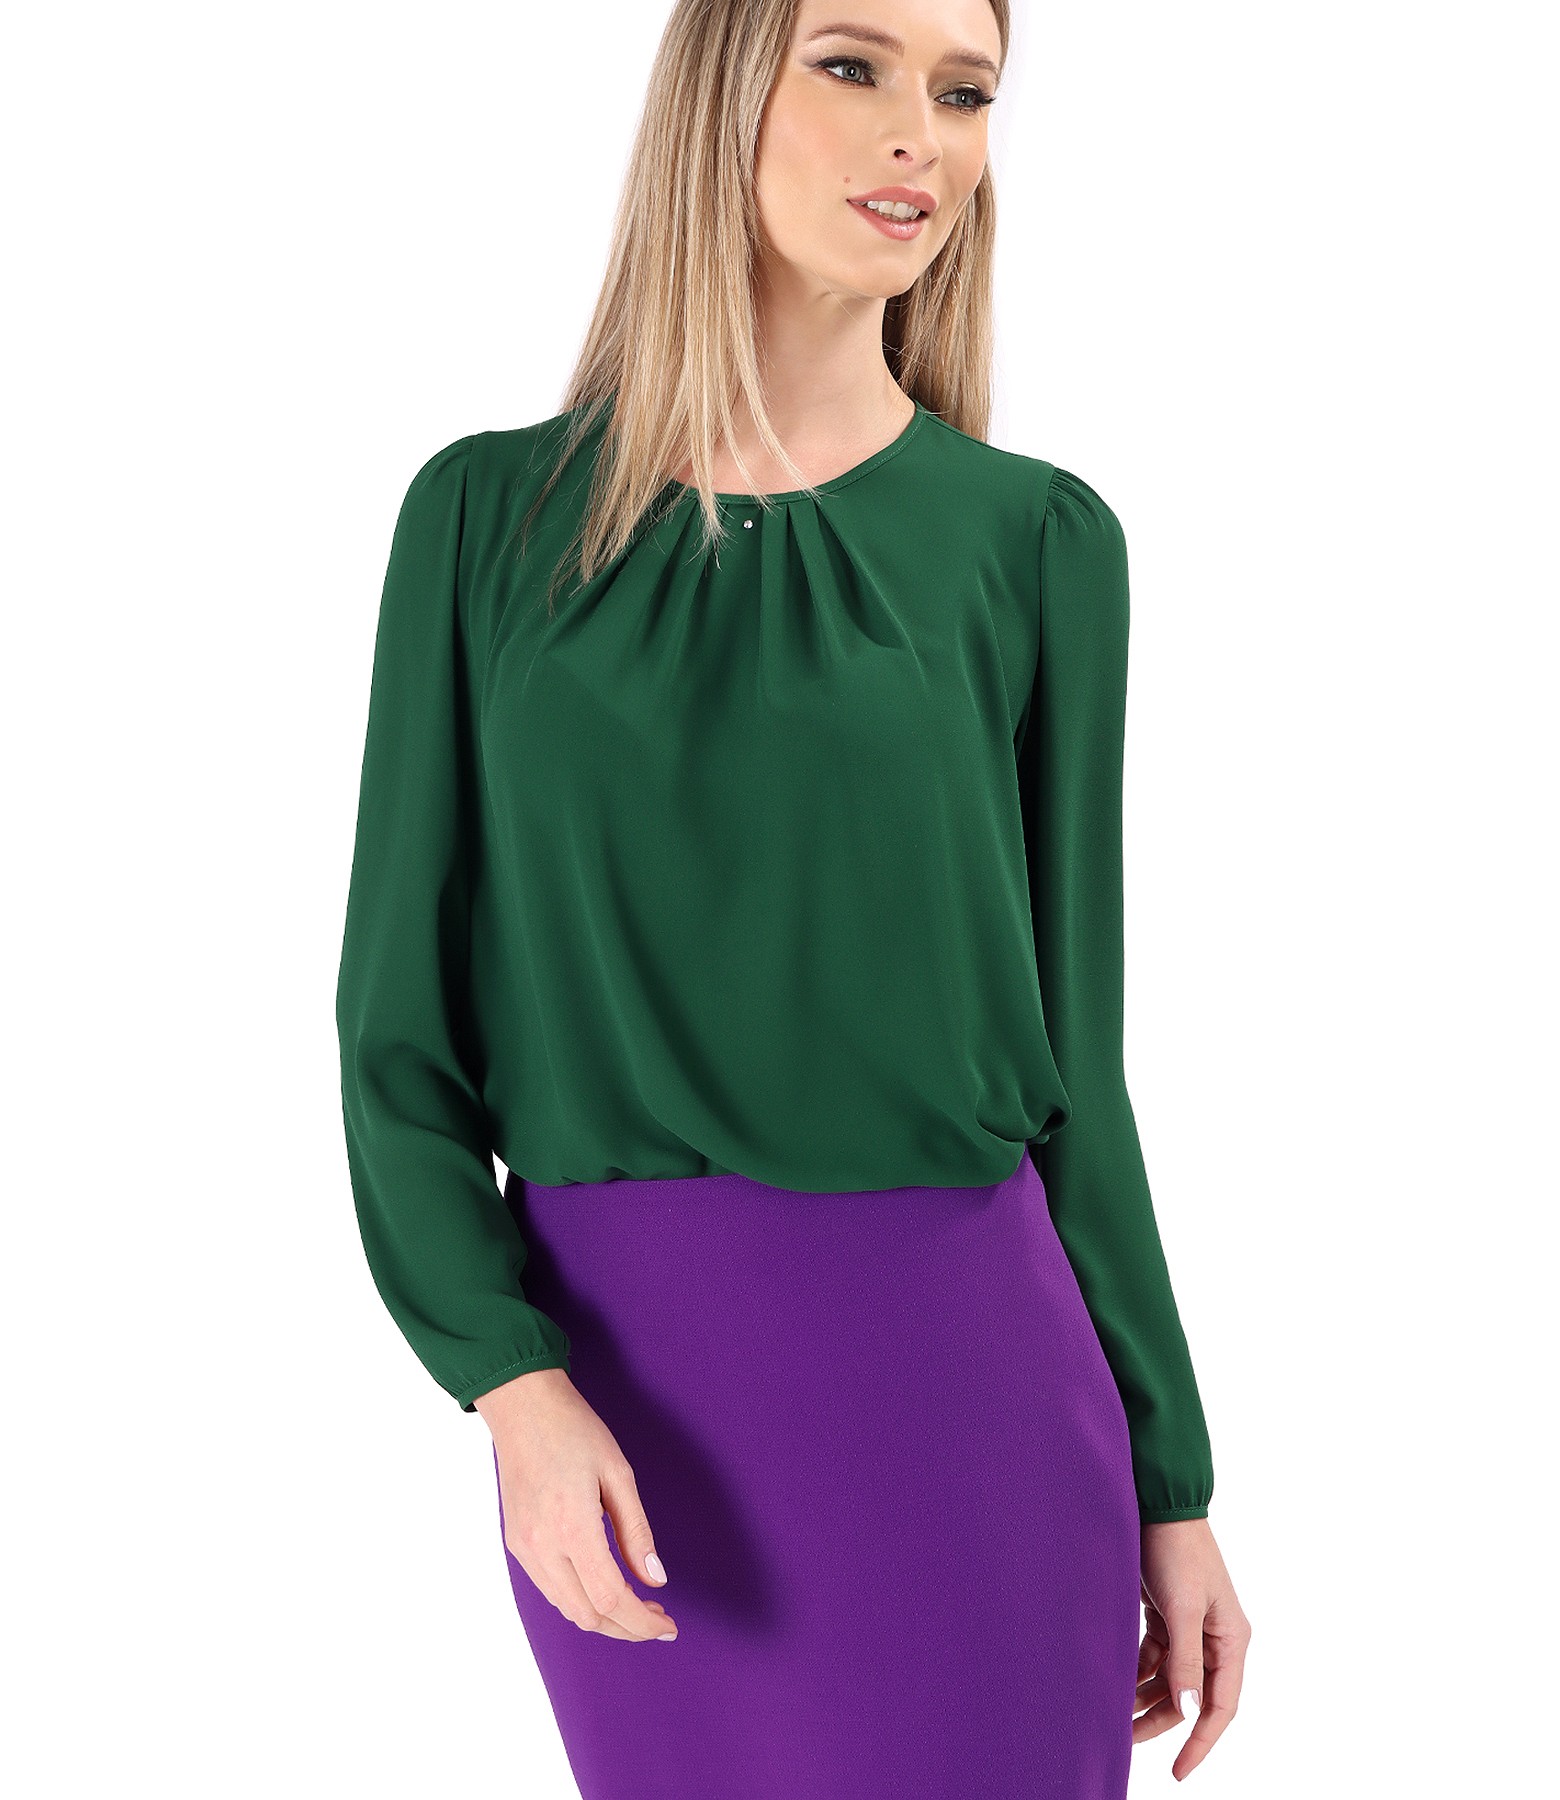 Blouse with folds on decolletage embellished with crystals green